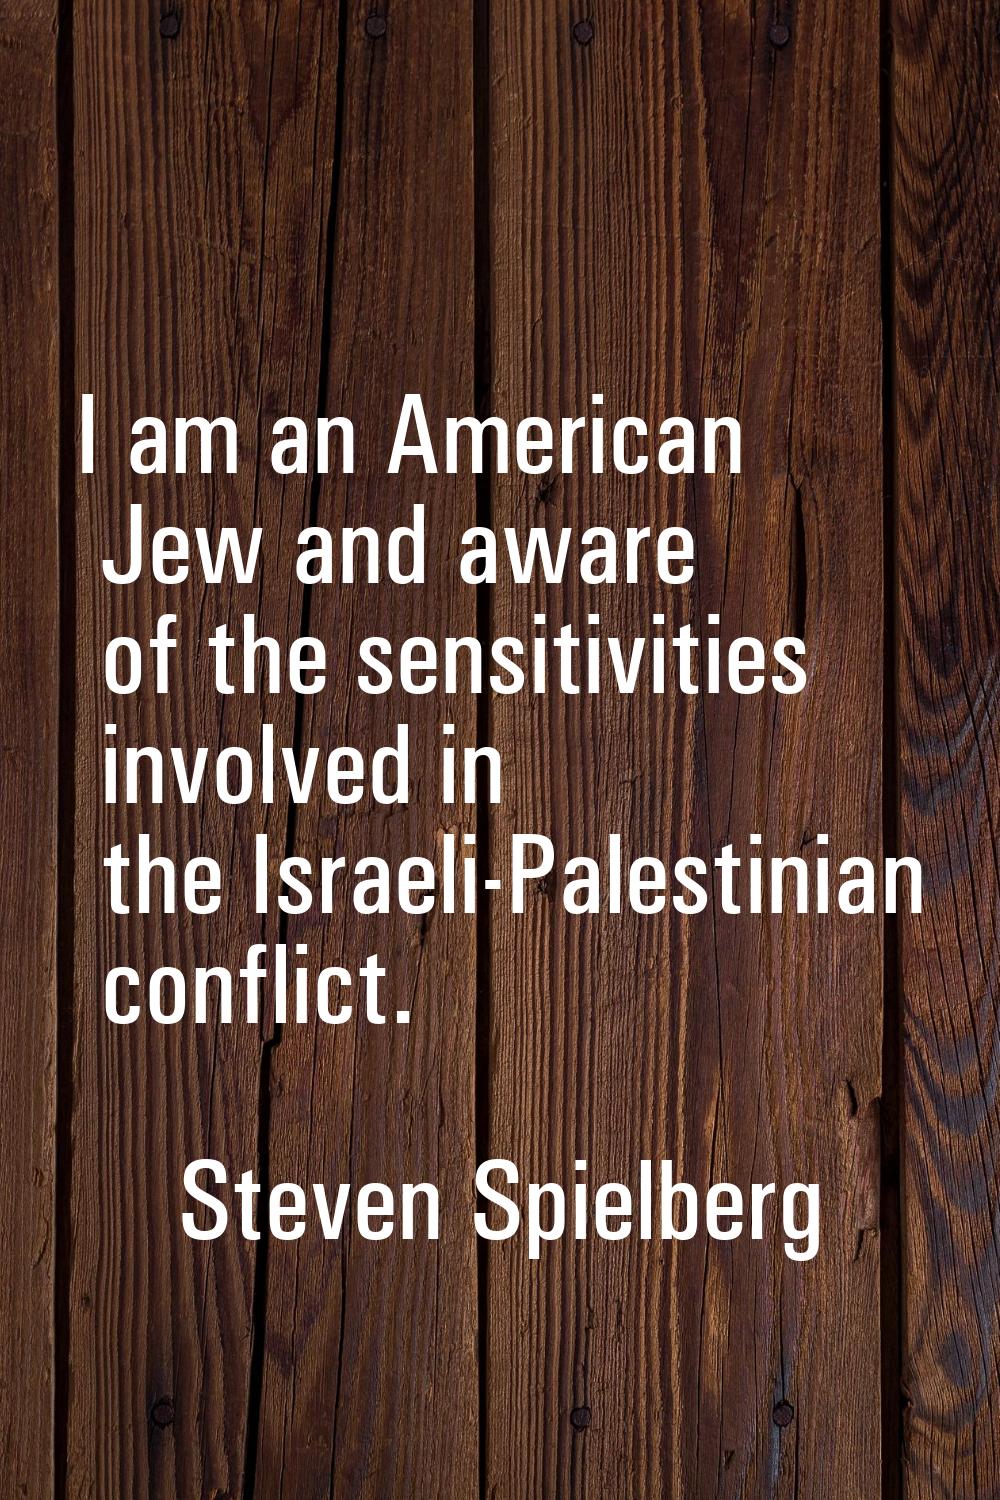 I am an American Jew and aware of the sensitivities involved in the Israeli-Palestinian conflict.